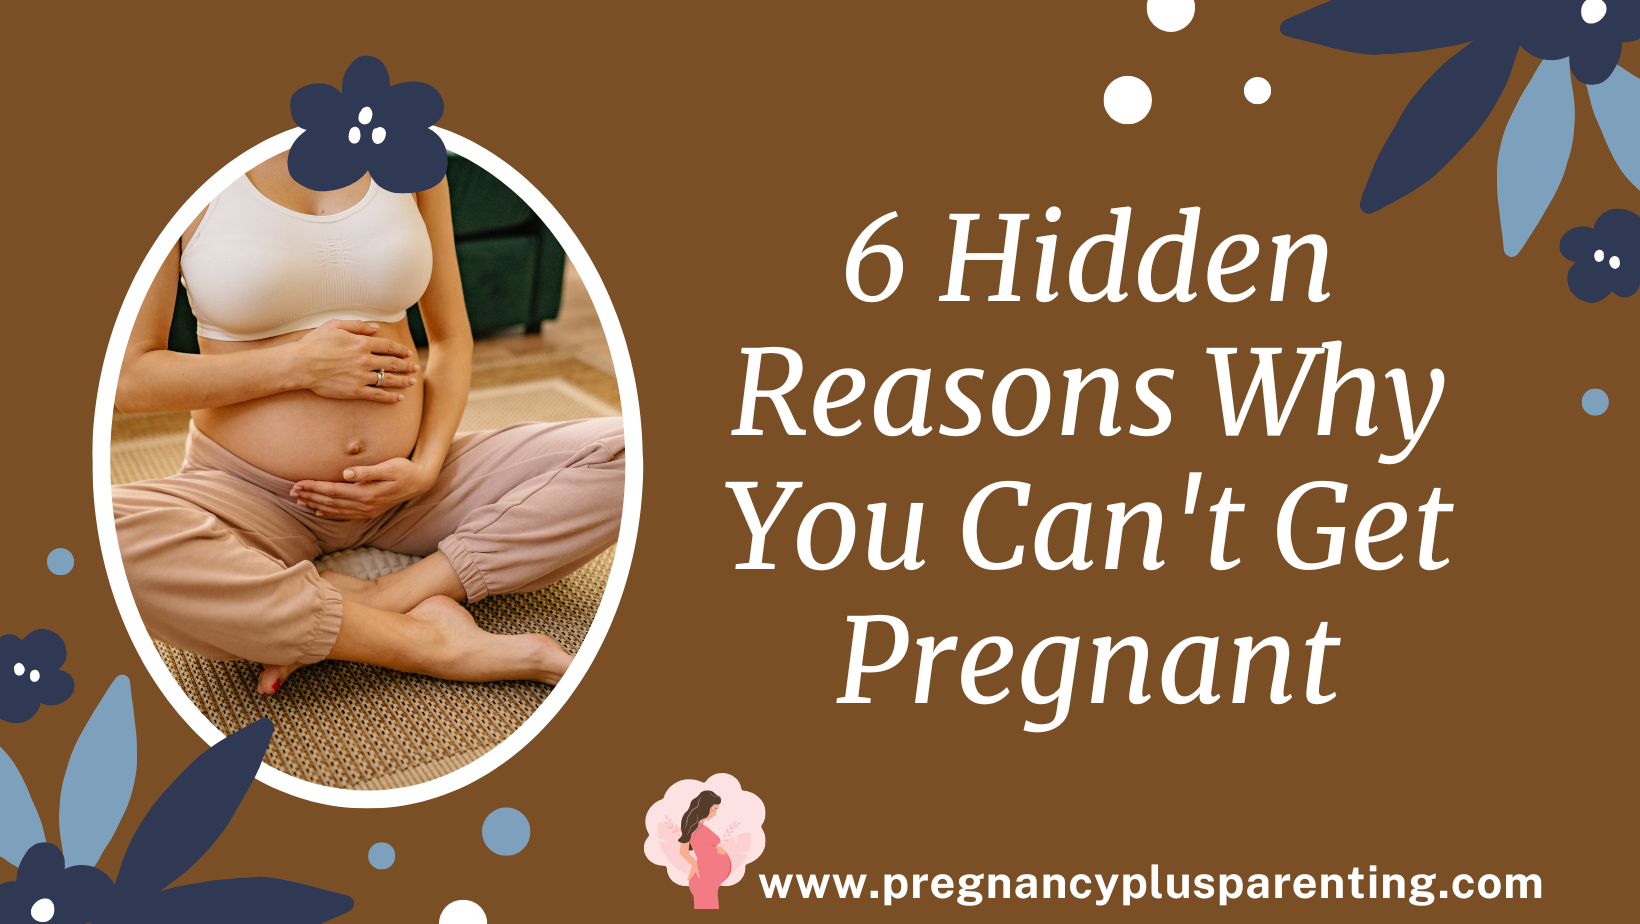 6 Hidden Reasons Why You Can't Get Pregnant